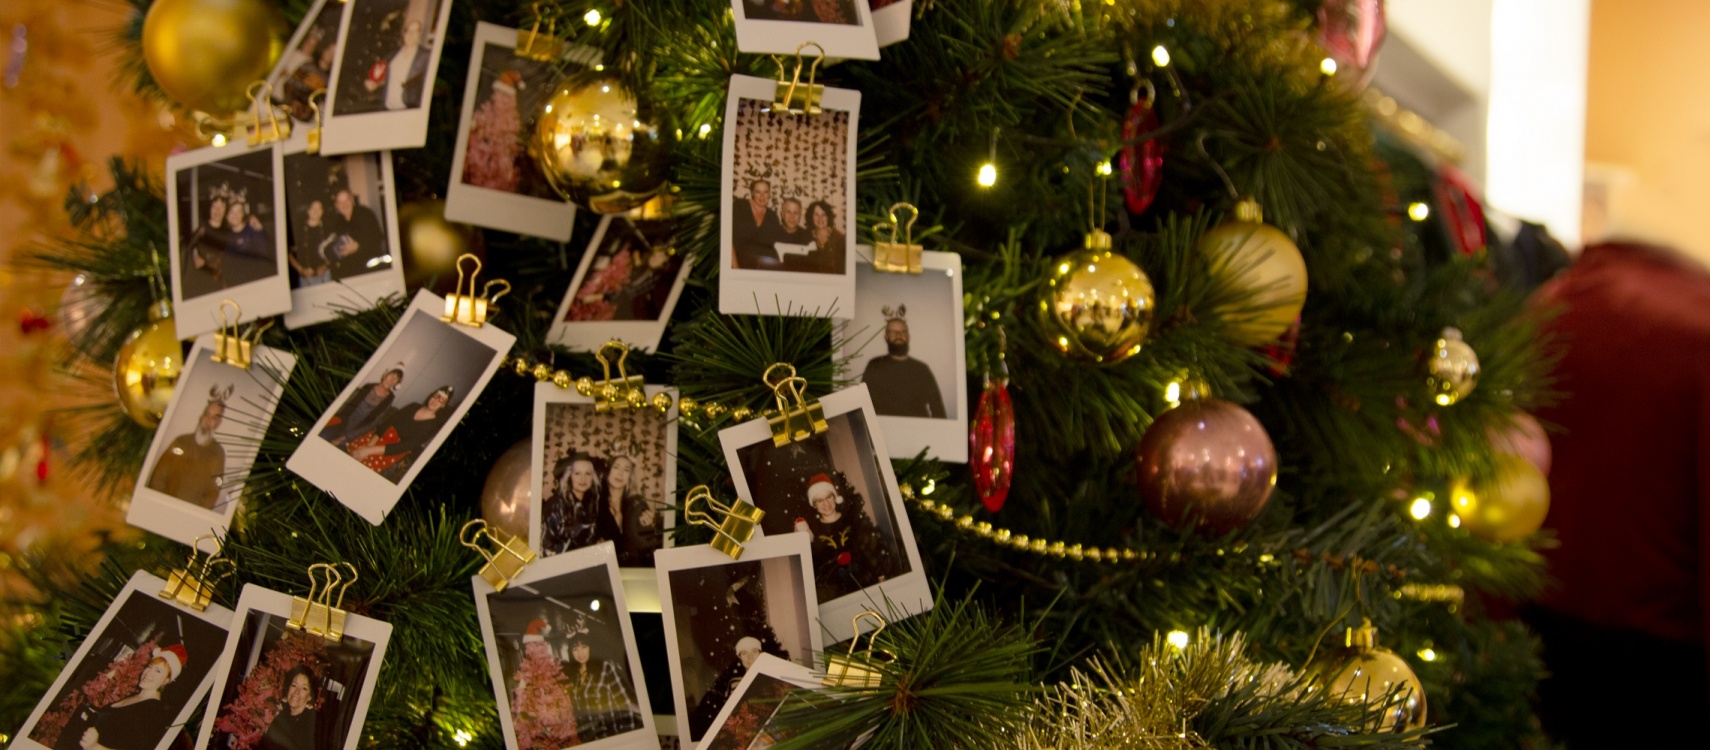 Festive Christmas tips from the TopVintage team 